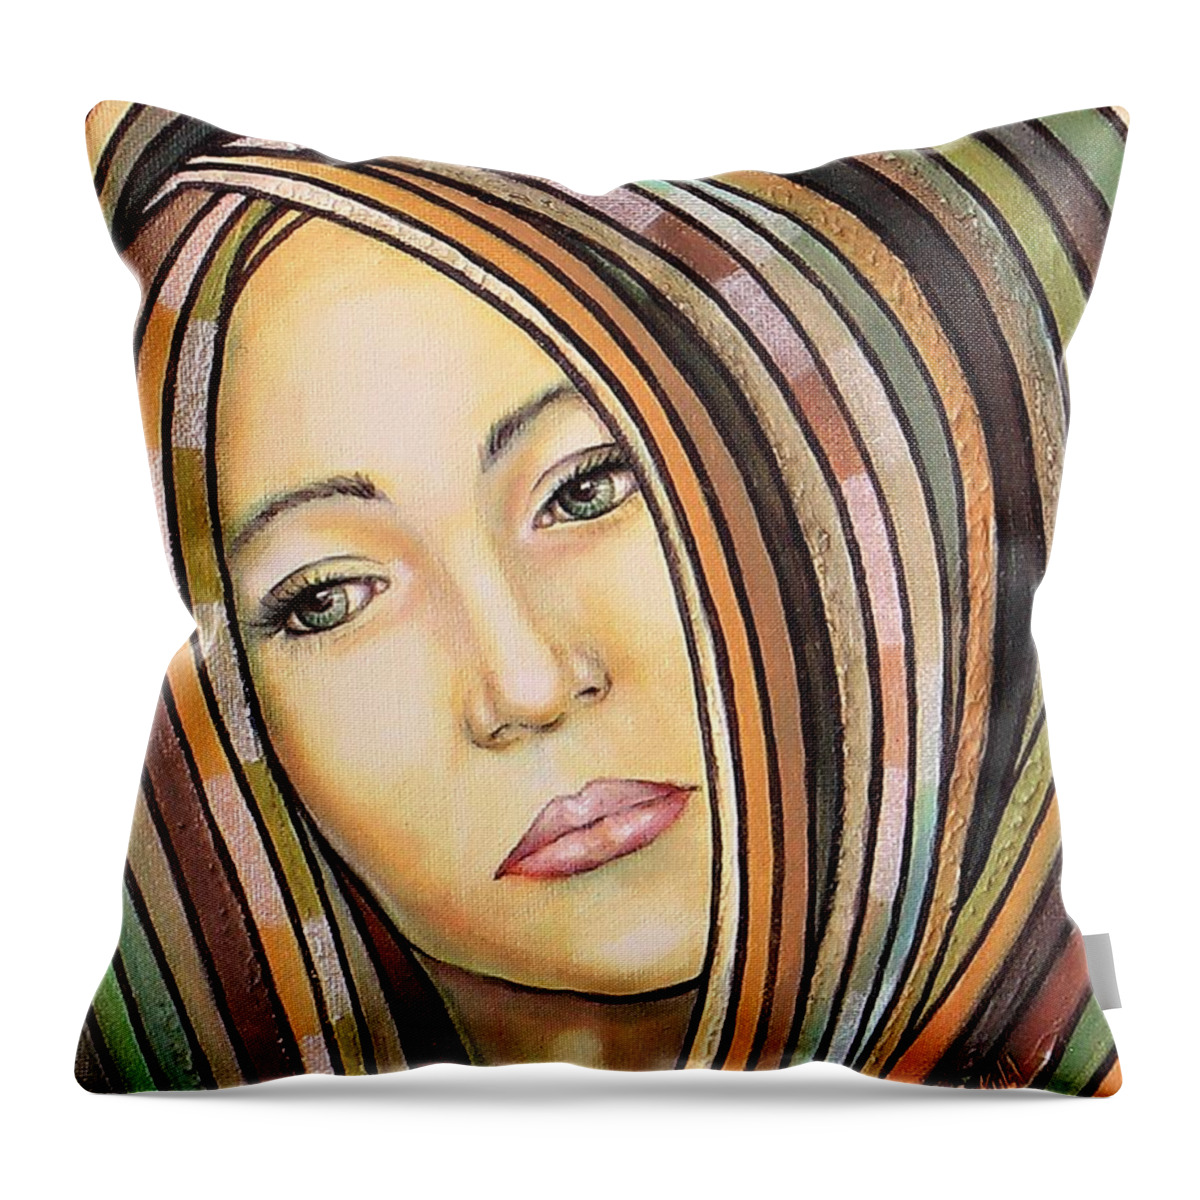 Woman Throw Pillow featuring the painting Melancholy 300308 by Sylvia Kula